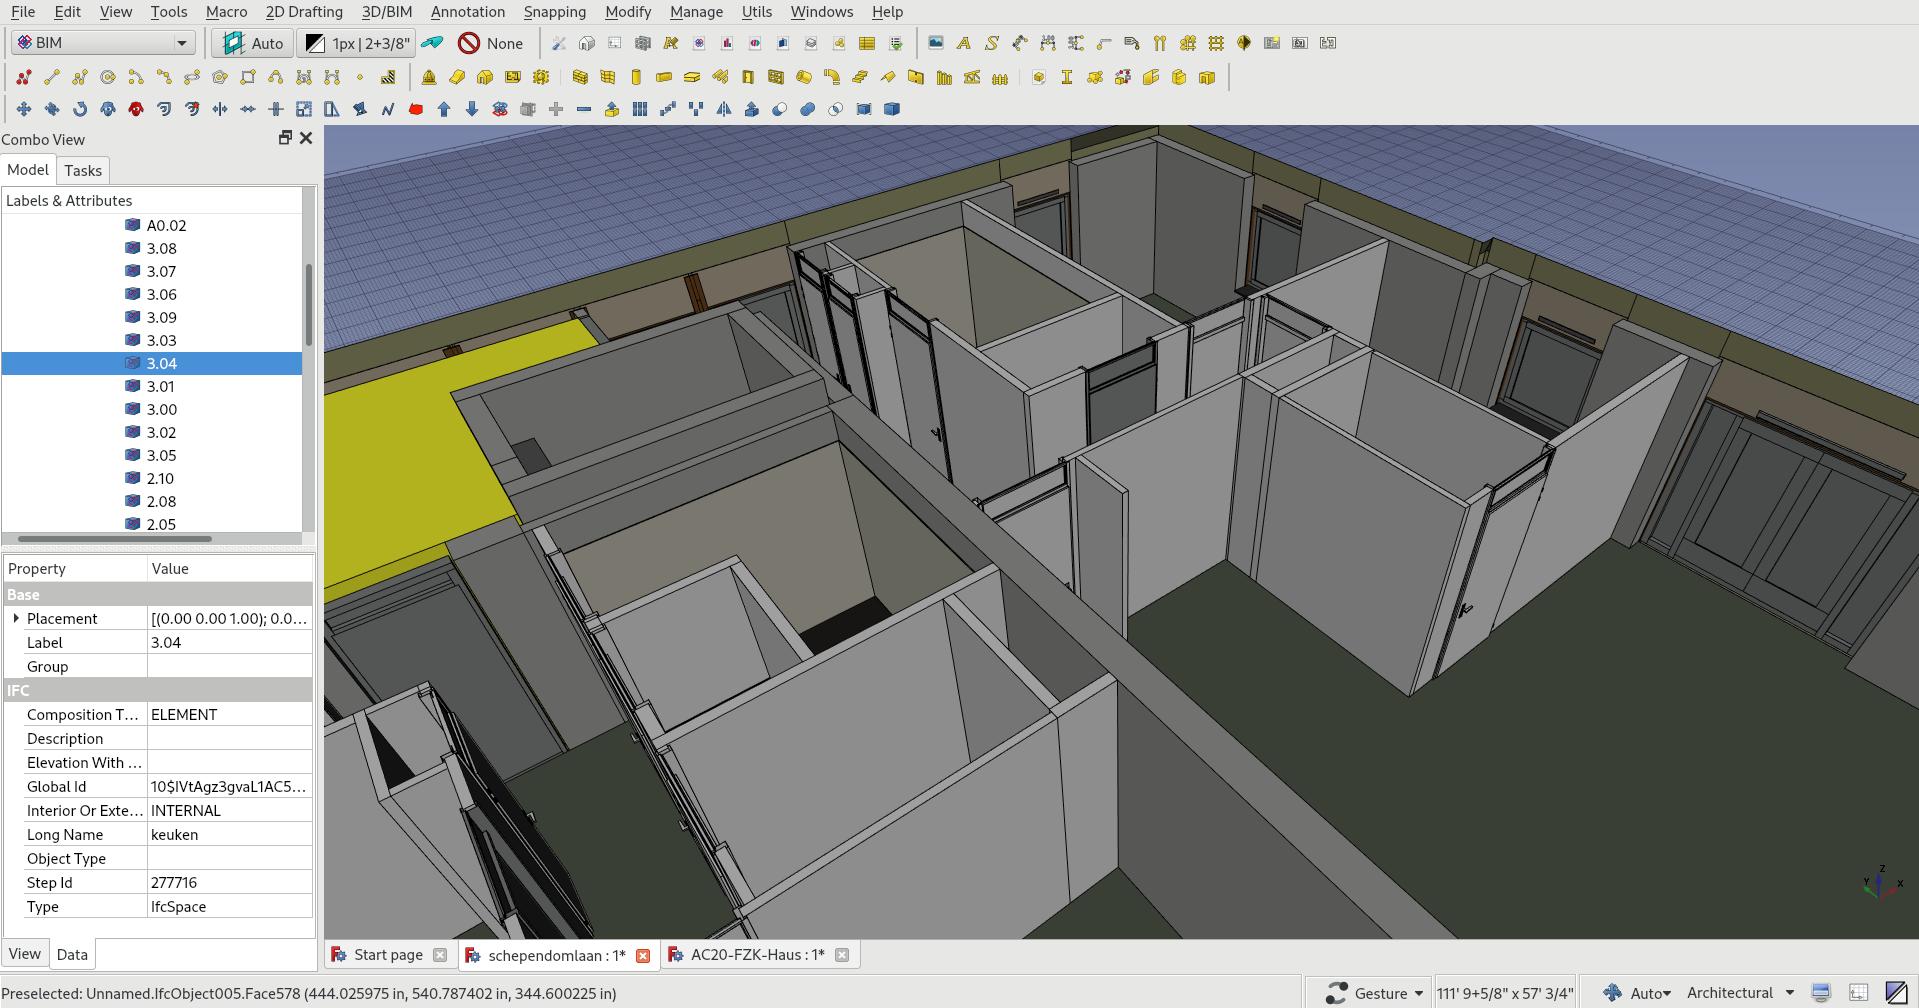 A scrrenshot of FreeCAD showing the inside of a storey of an IFC model